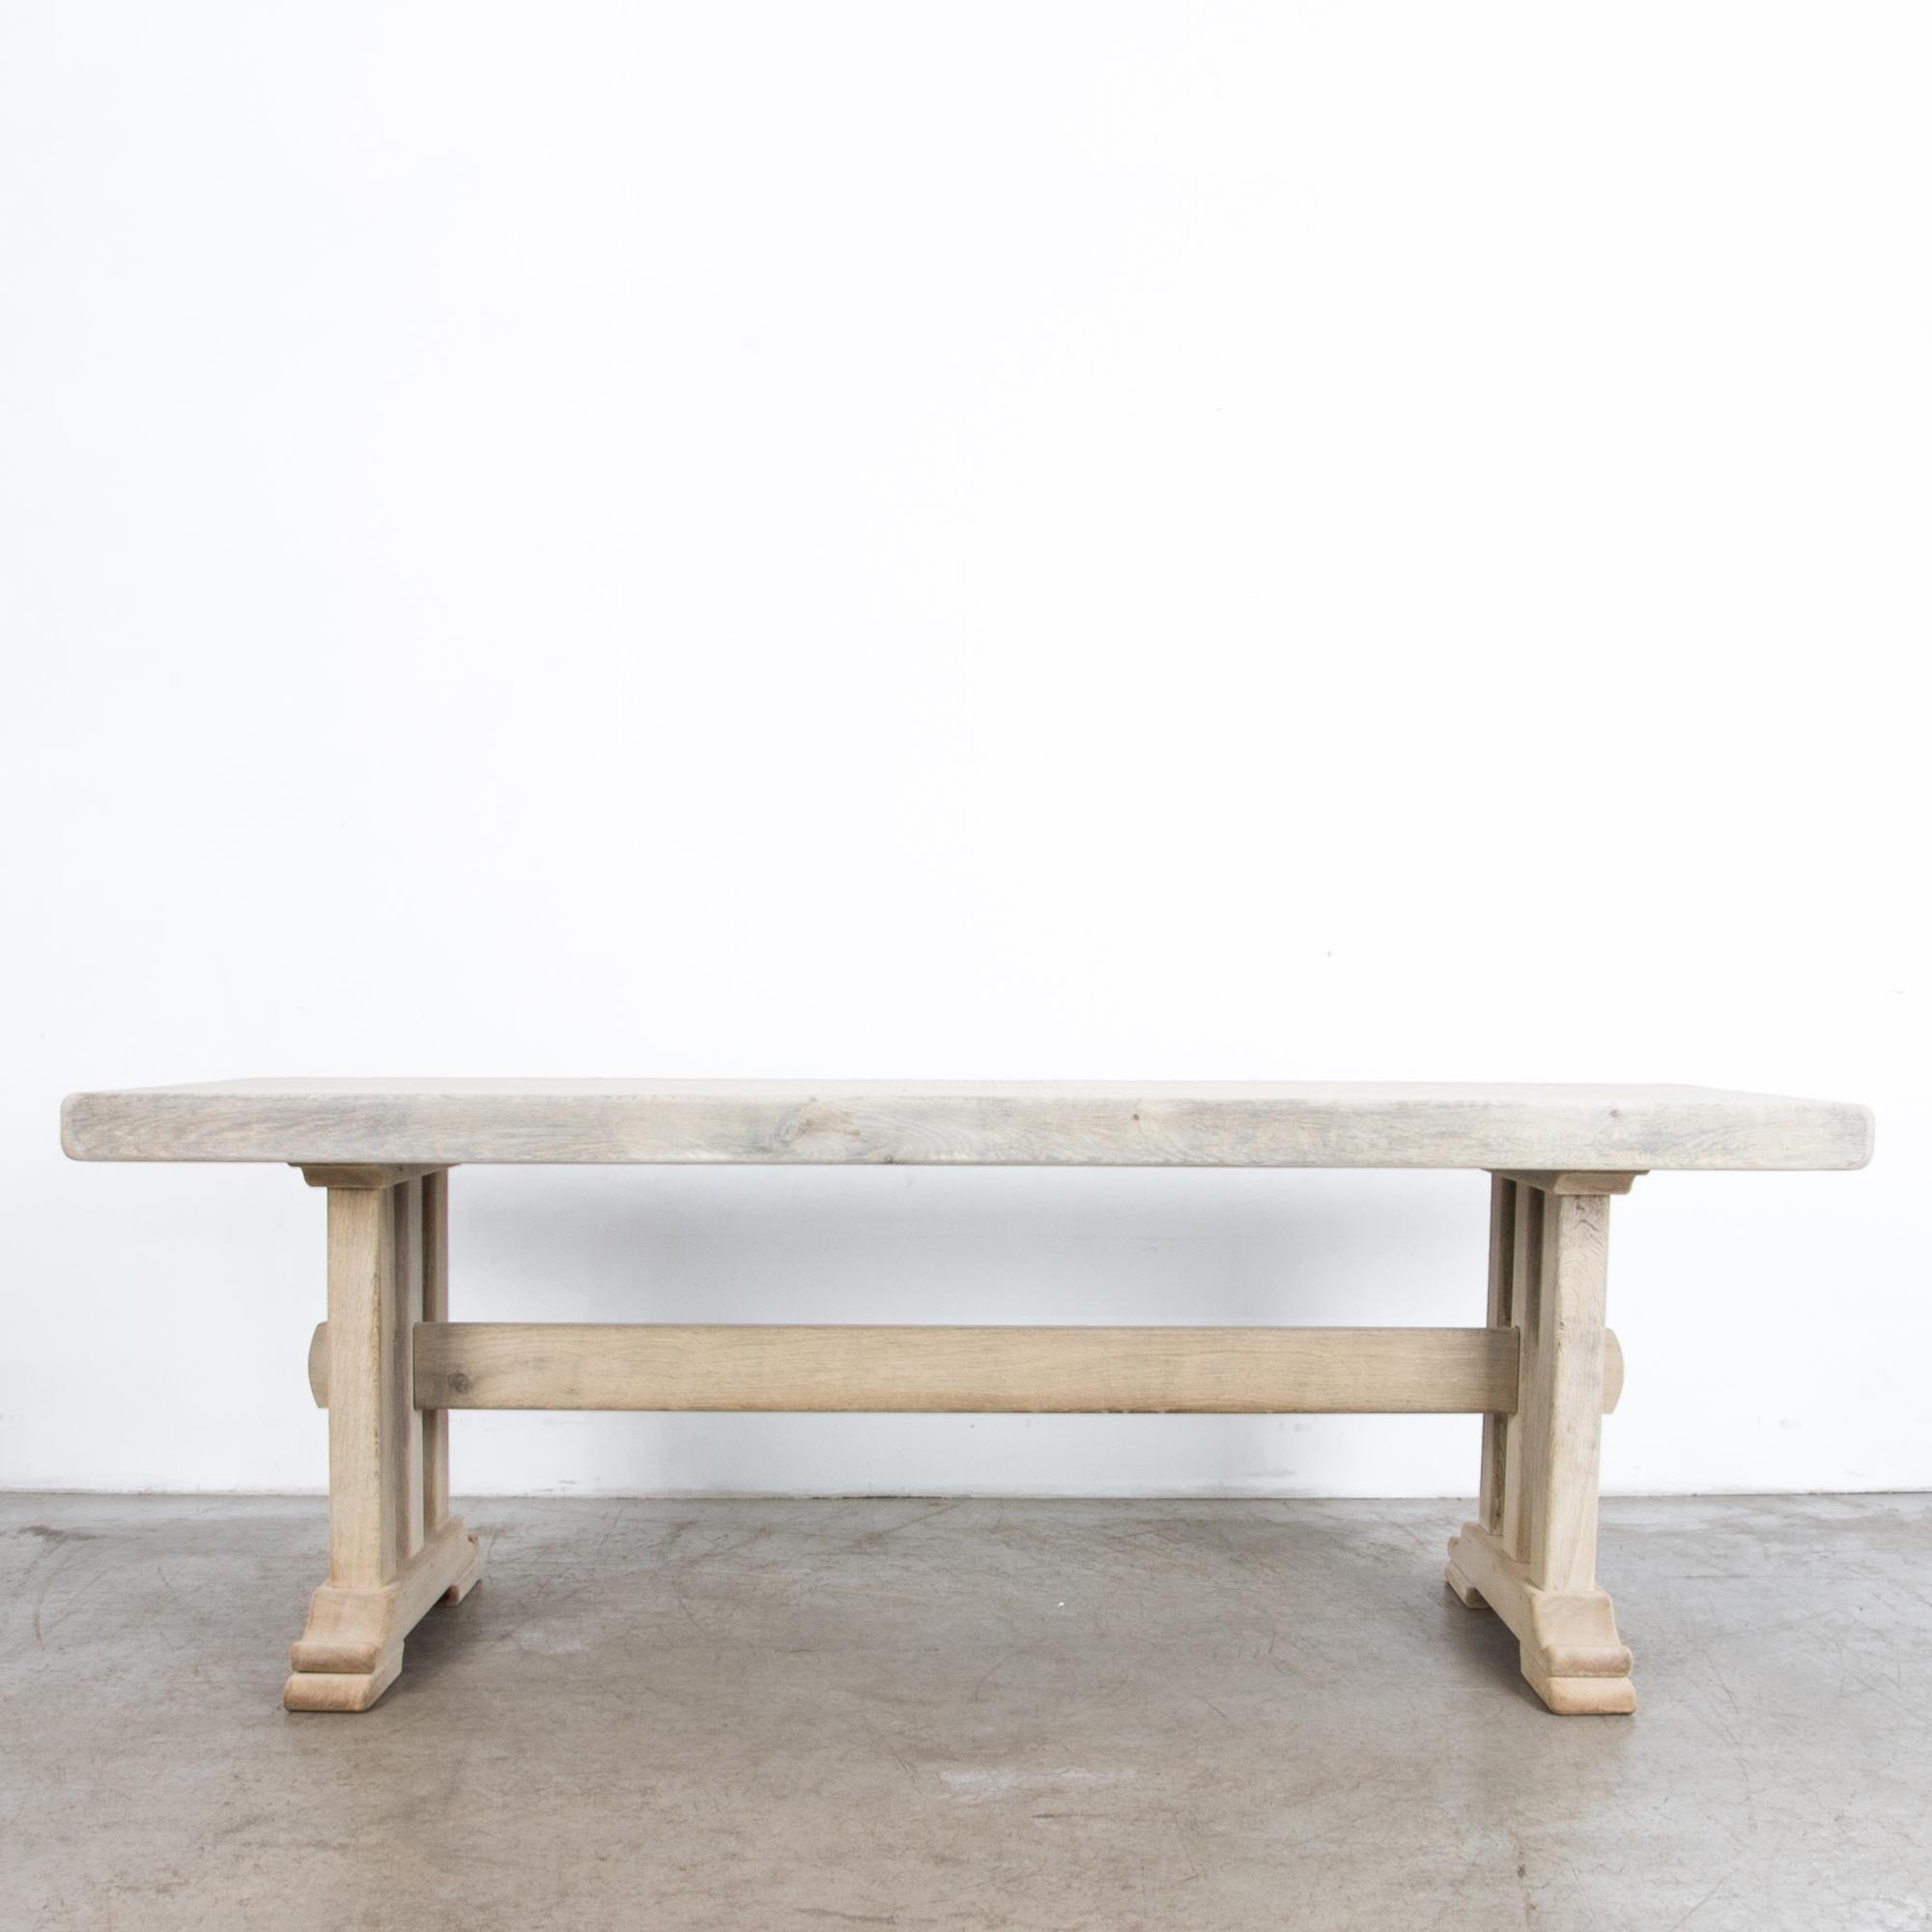 This solid and elegant bleached oak dining table with a beautiful wood grain was made in Belgium, circa 1950. The table is constructed with smooth, clean lines, softened by the rounded edges and feet. The traditional craftsmanship is apparent in the